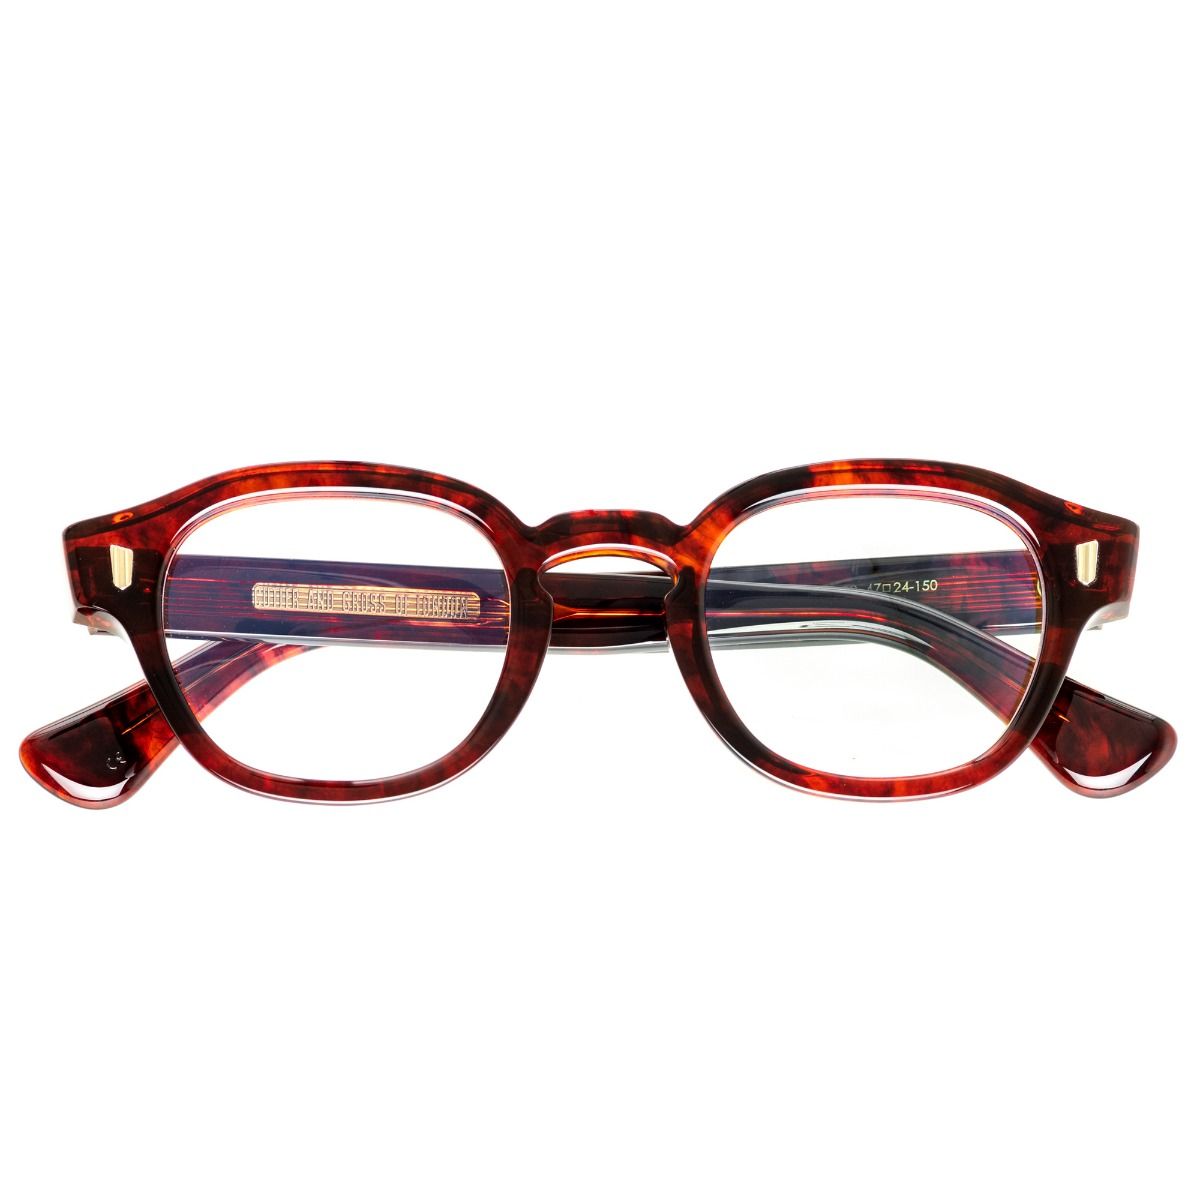 9290 Optical Round Glasses - Red Havana by Cutler and Gross